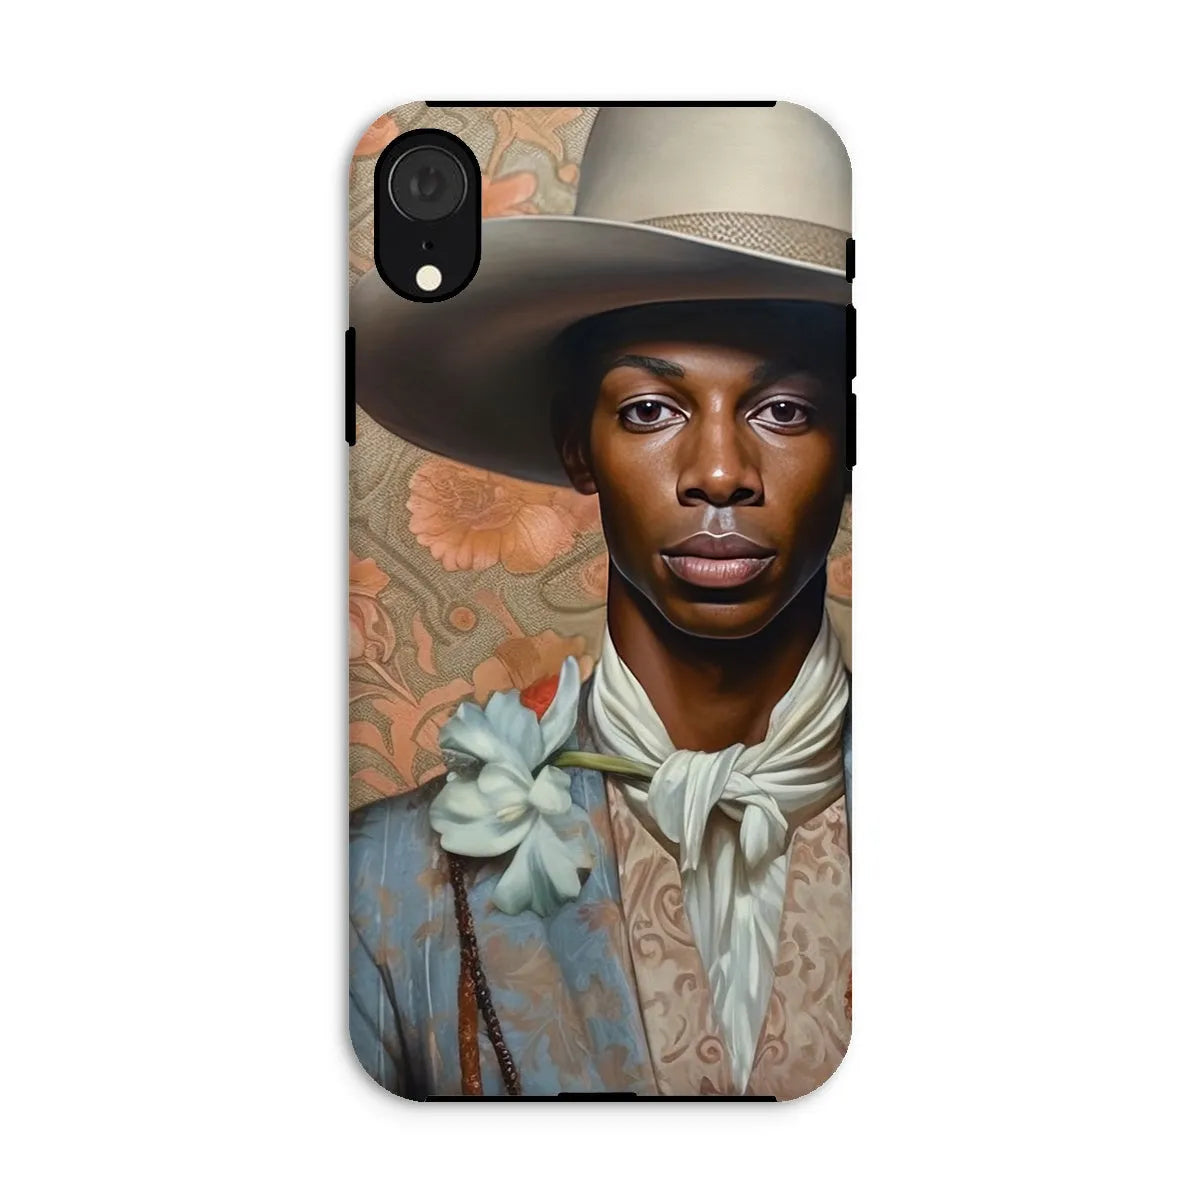 Apollo The Gay Cowboy - Gay Aesthetic Art Phone Case - Iphone Xr / Matte - Mobile Phone Cases - Aesthetic Art